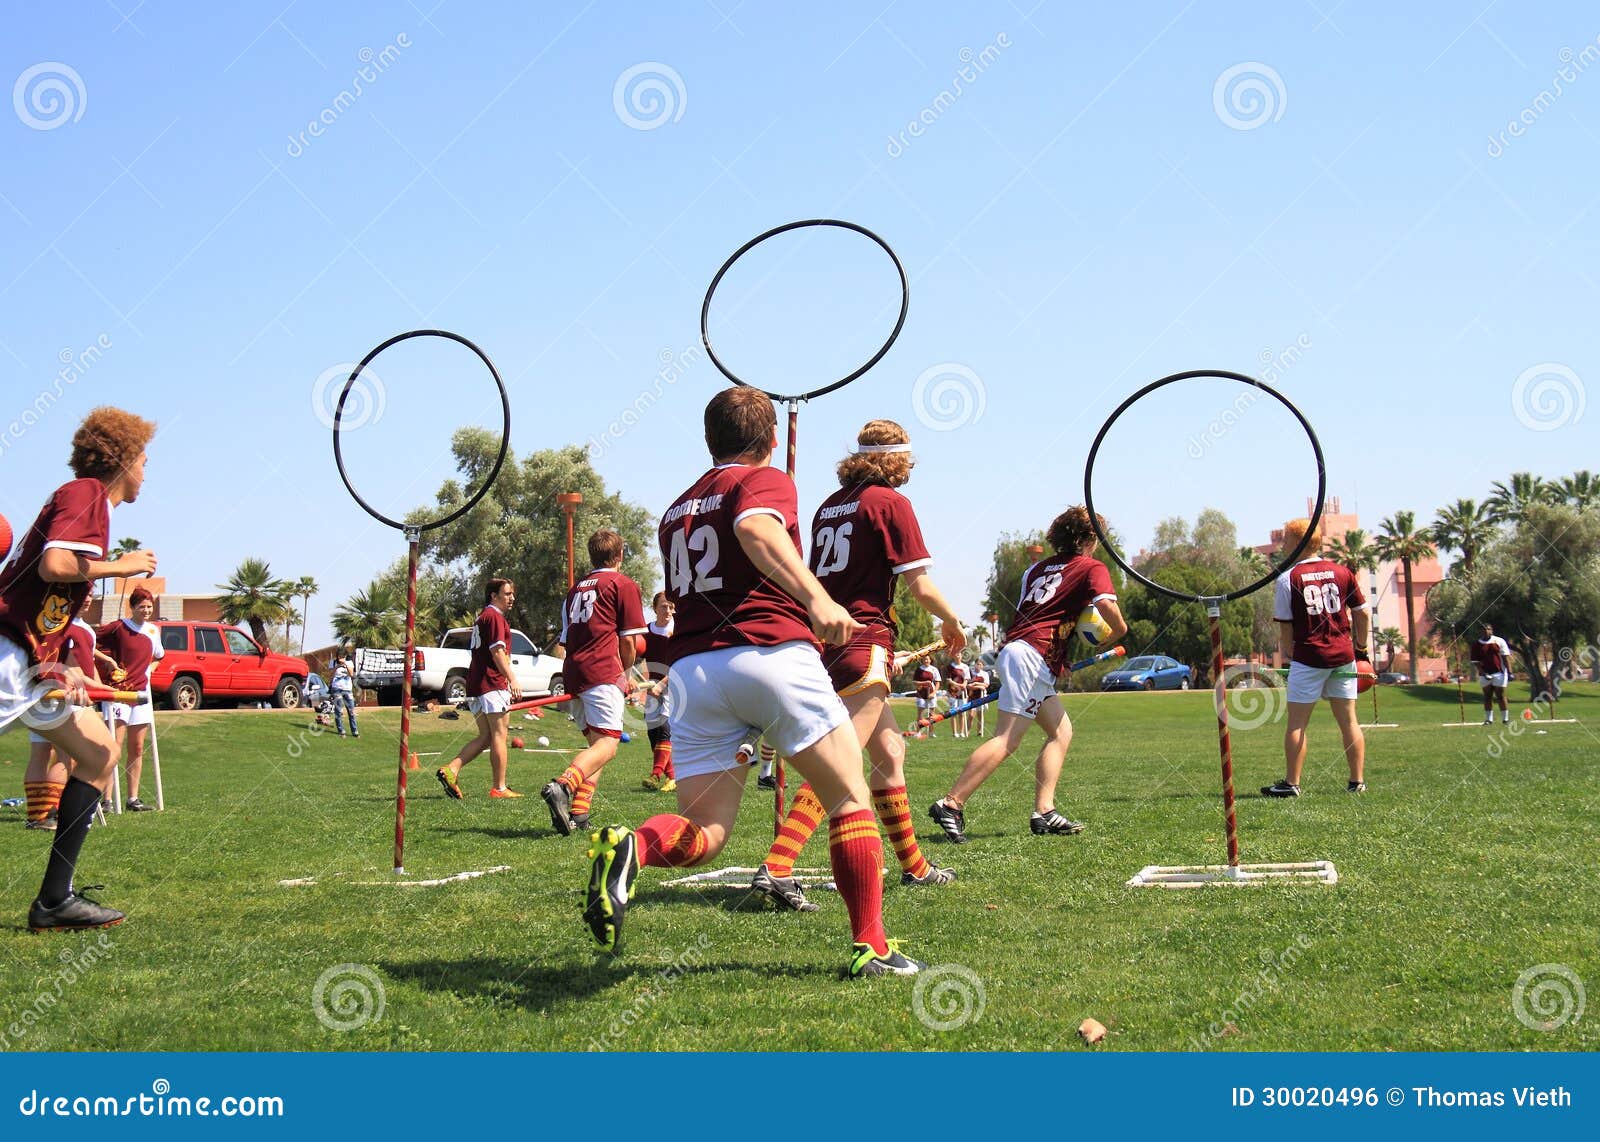 390 Quidditch Photos Free Royalty Free Stock Photos From Dreamstime